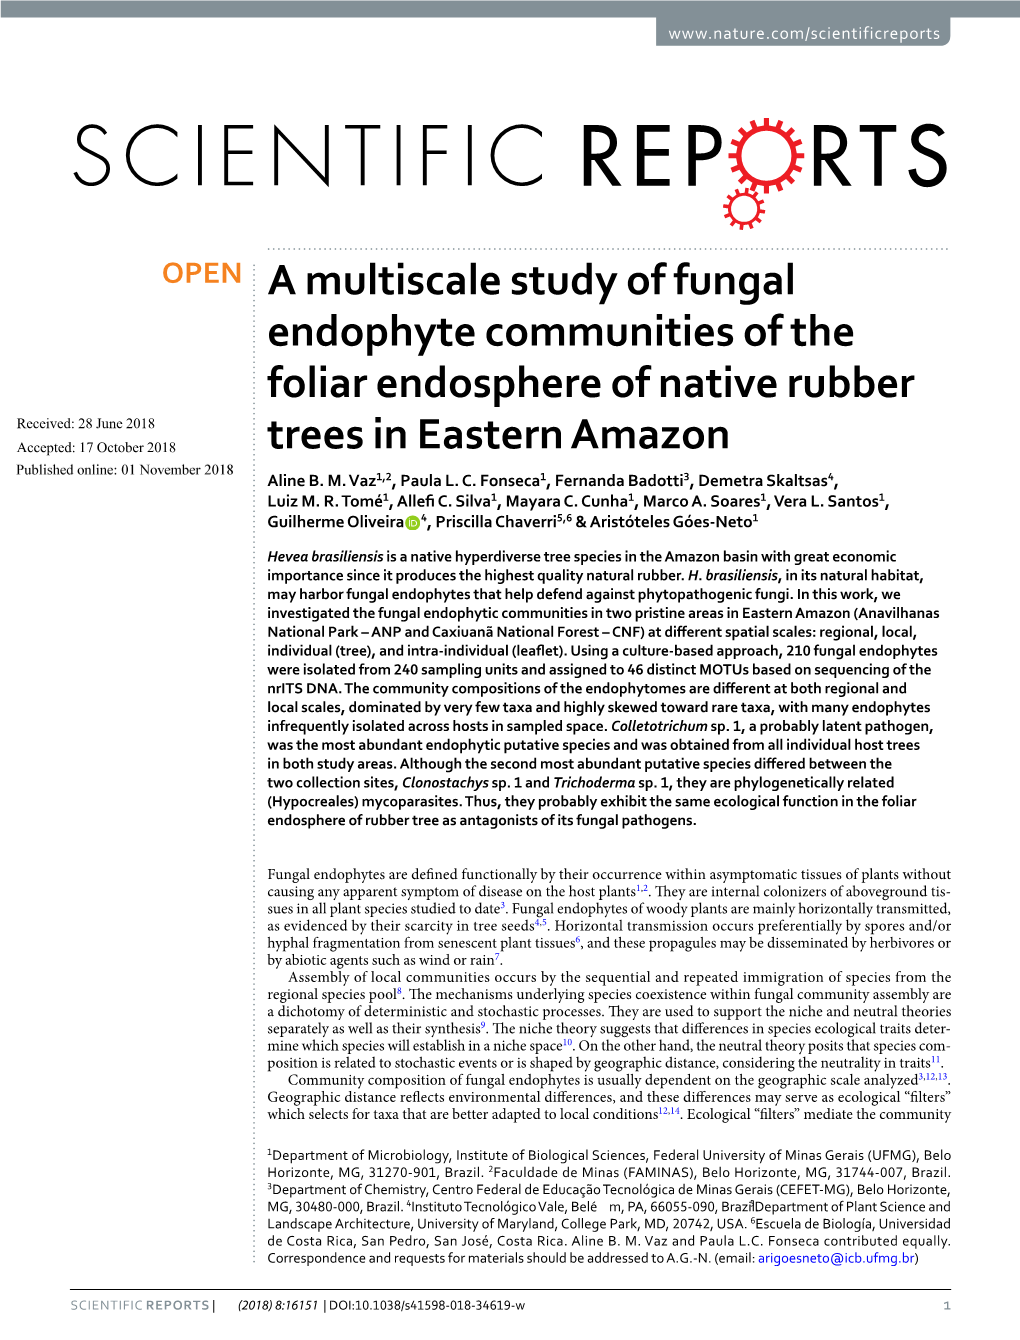 A Multiscale Study of Fungal Endophyte Communities of the Foliar